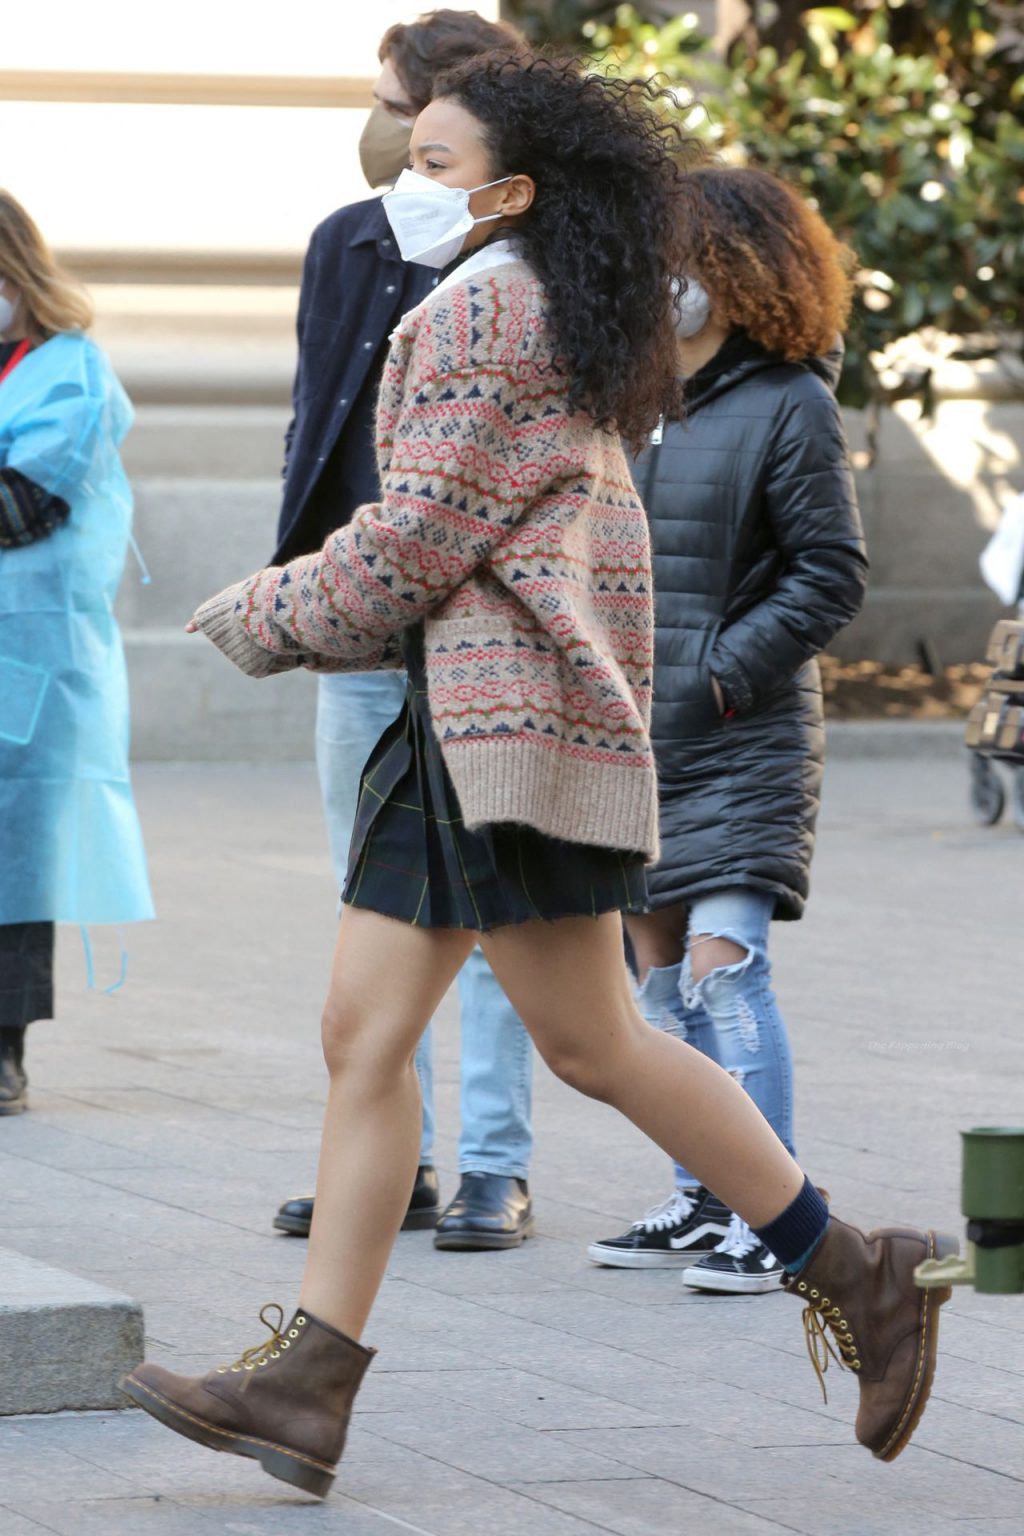 Leggy Whitney Peak is Pictured on the Set of the Metropolitan Museum in NYC (13 Photos)